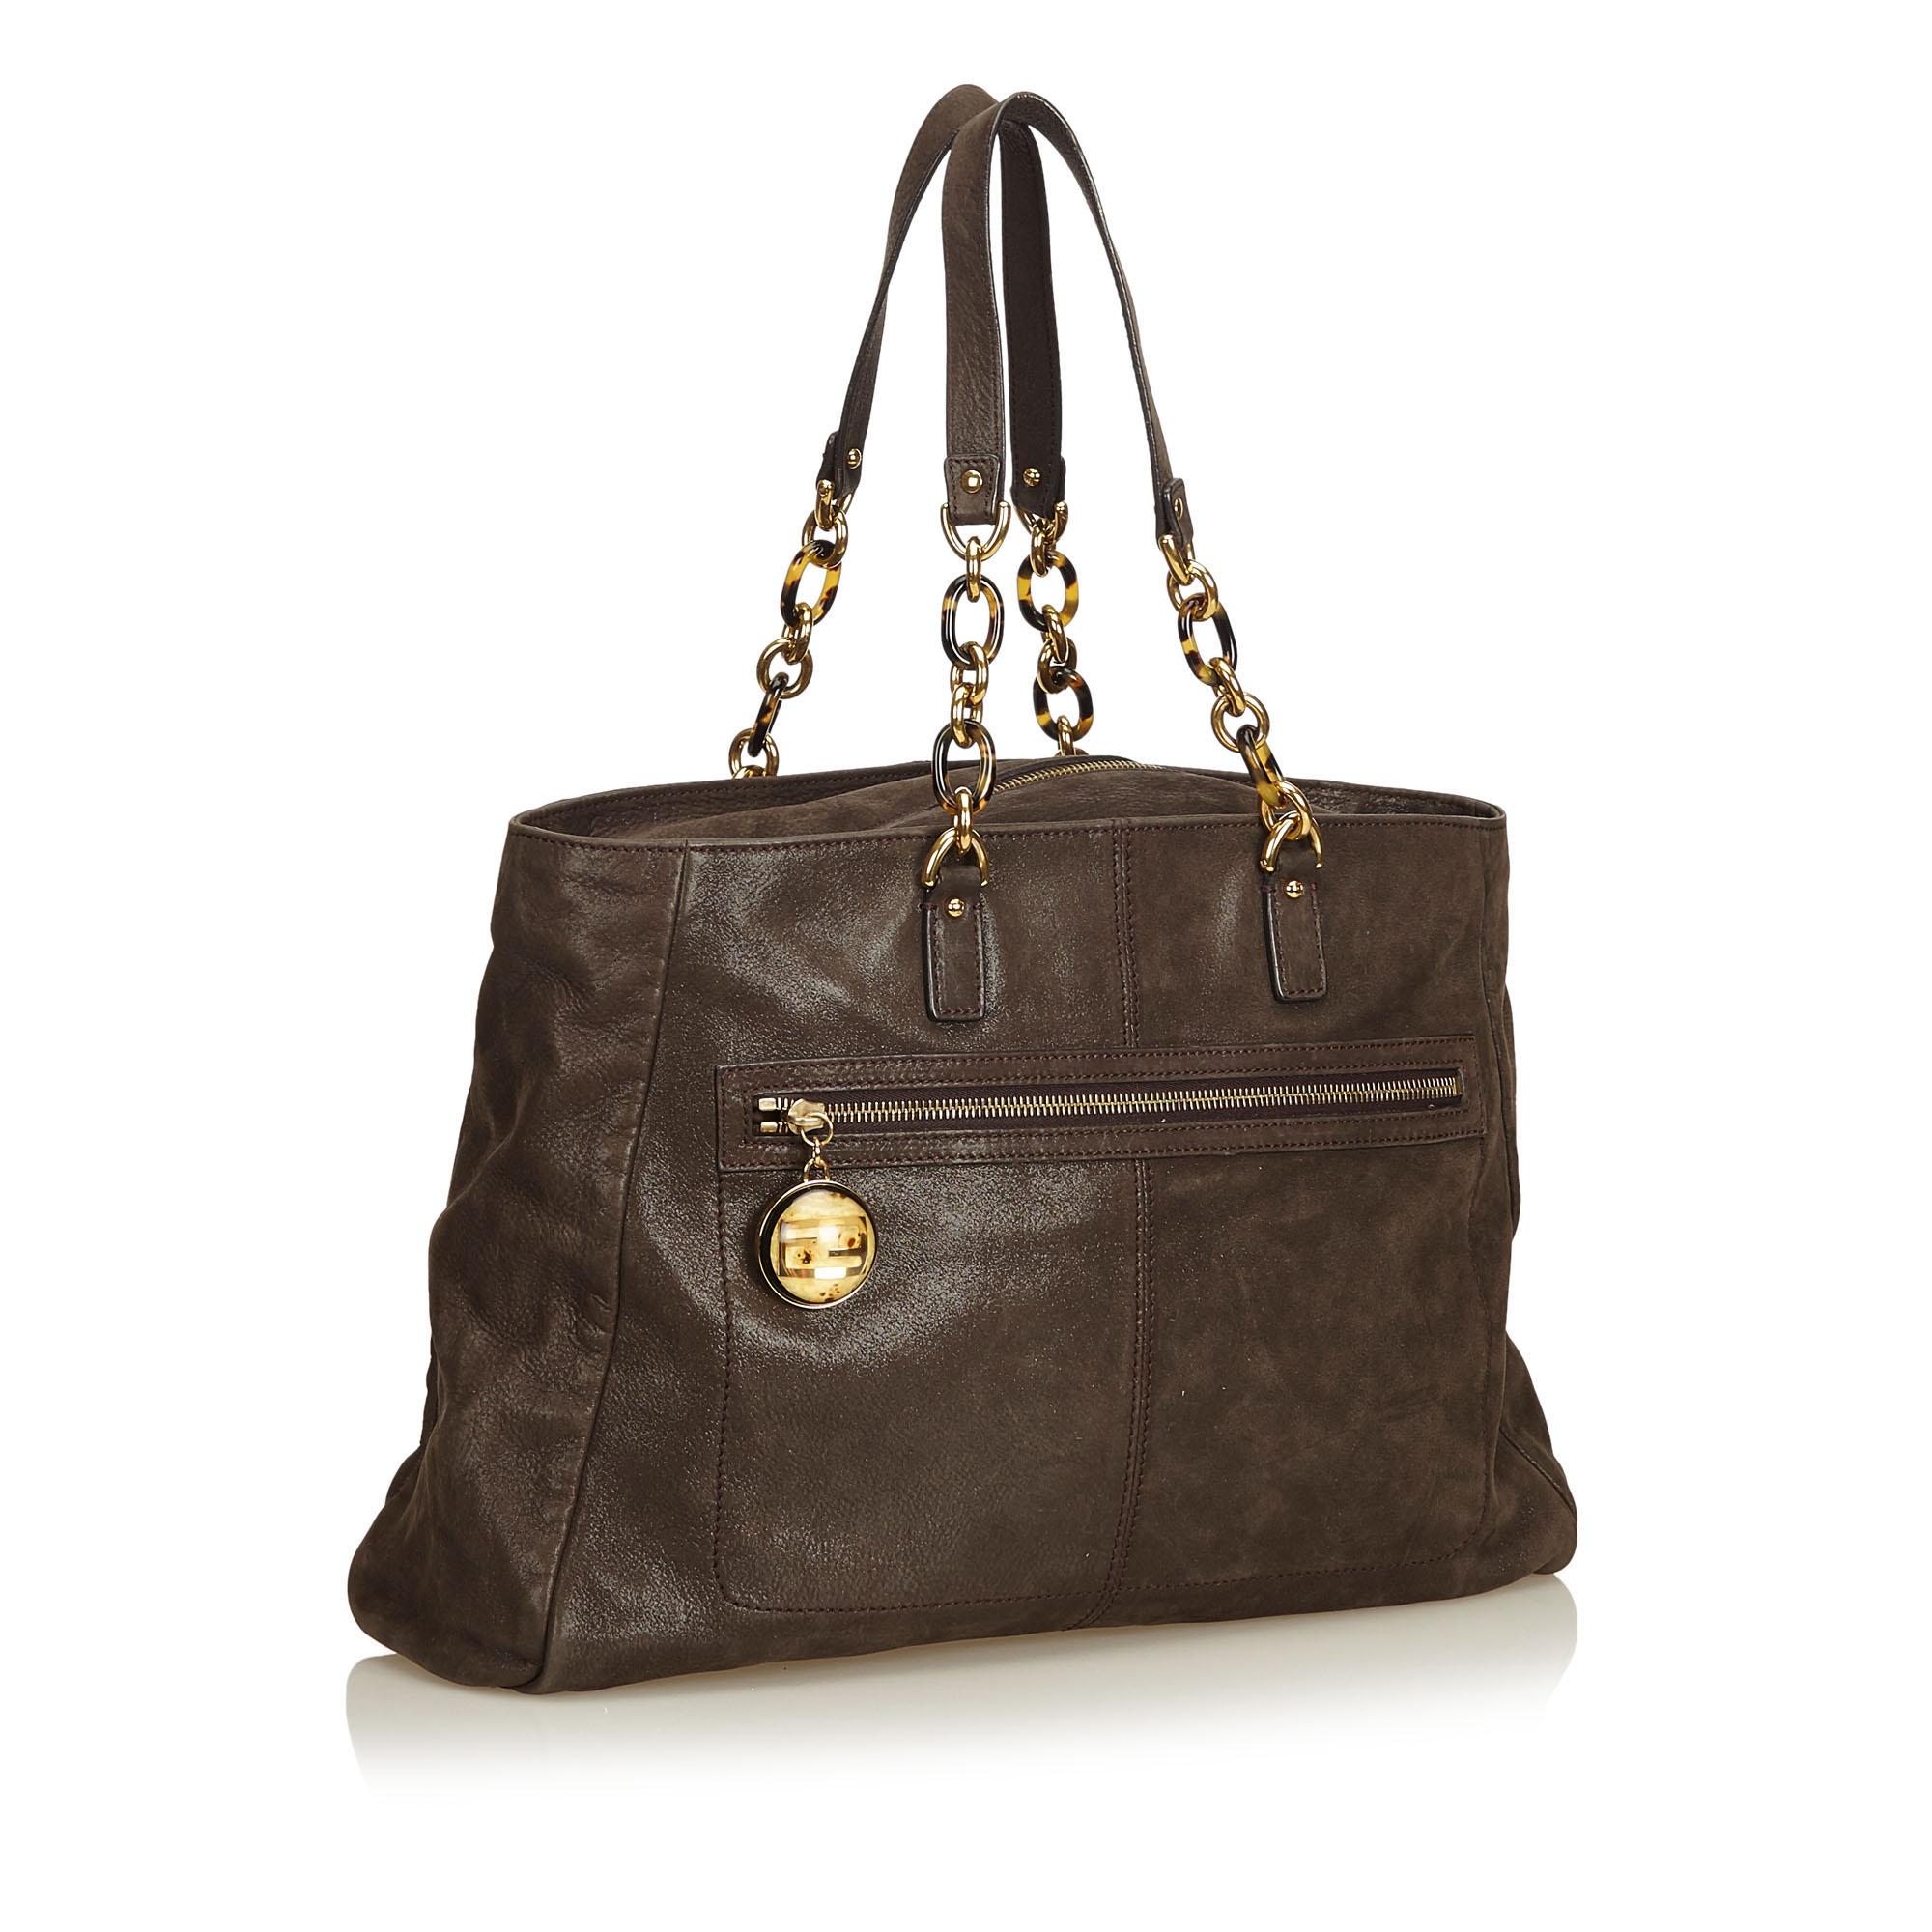 This shoulder bag features a lamé leather body, flat leather straps with chain details, top zip closure, exterior zip pocket, and an interior slip pocket. It carries as AB condition rating.

Inclusions: 
Dust Bag

Dimensions:
Length: 28.00 cm
Width: